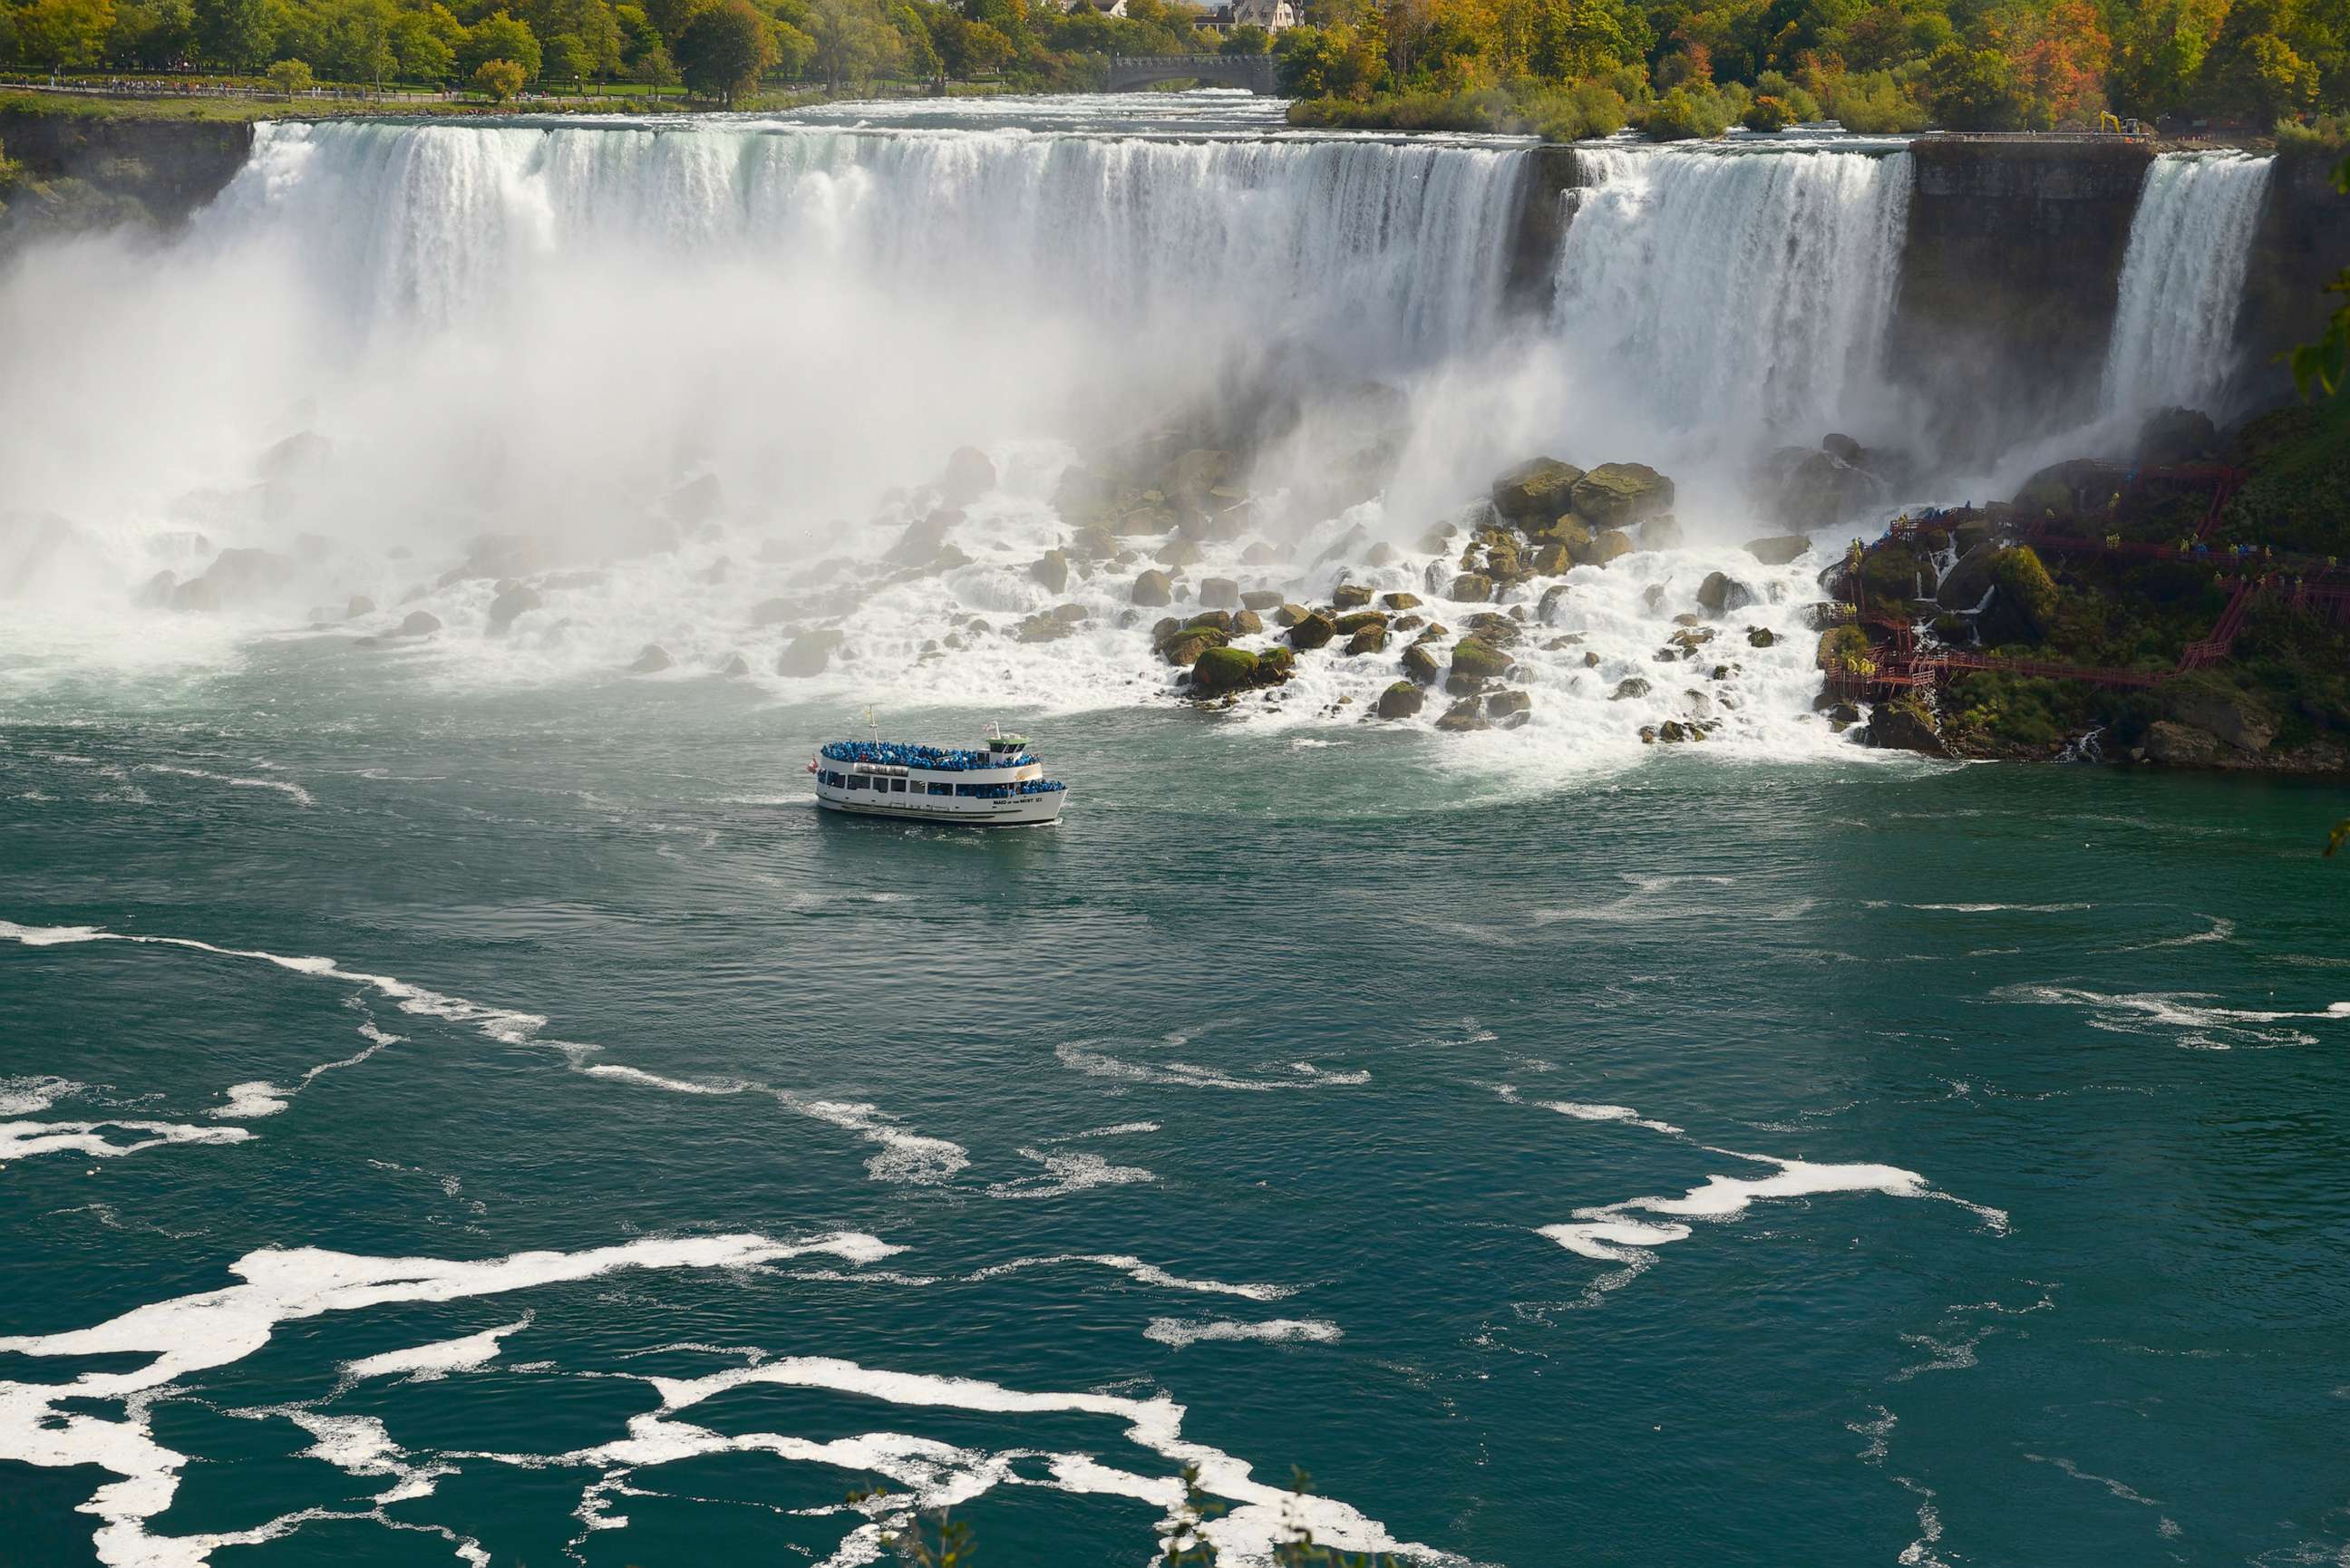 PHOTO: Maid of the Mist sightseeing boat at the US side of the Niagara Falls New York.